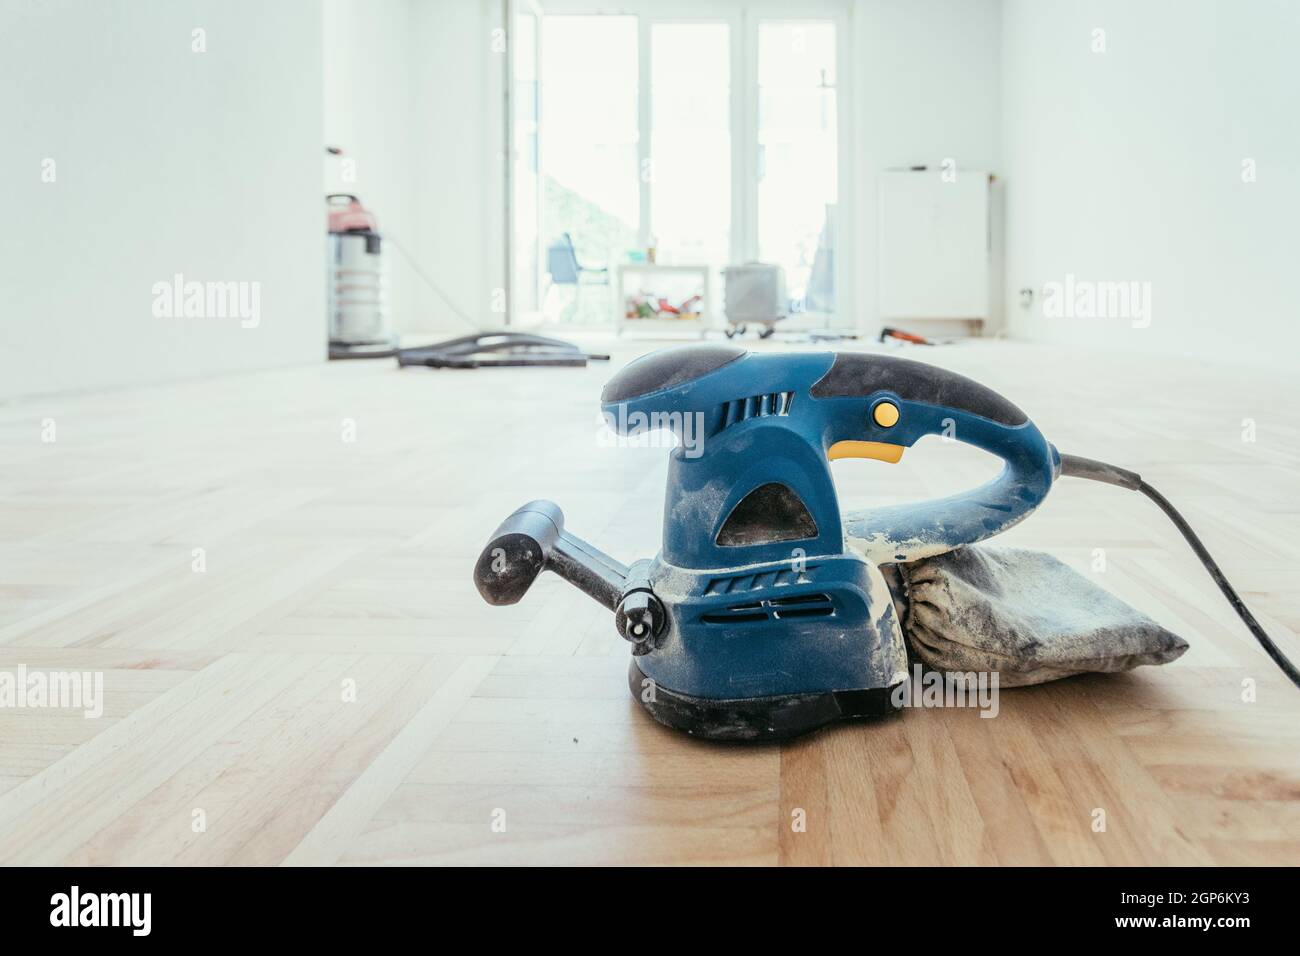 Close up of a sander power tool for DIY on wooden parquet floor Stock Photo